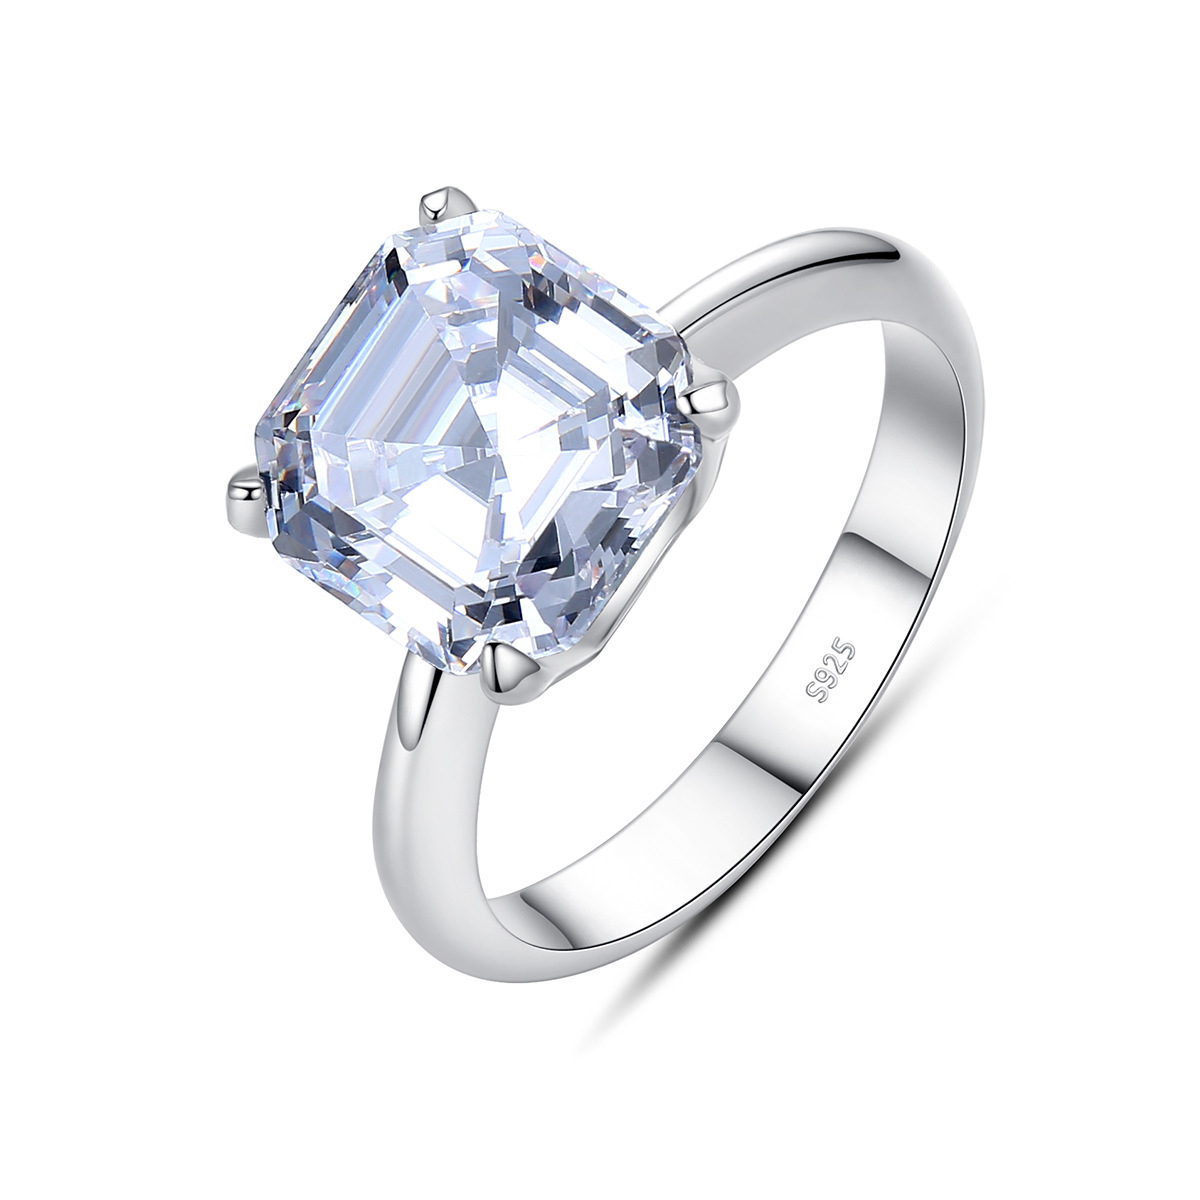 Atmospheric Square Cz Princess Cut Sterling Silver Ring